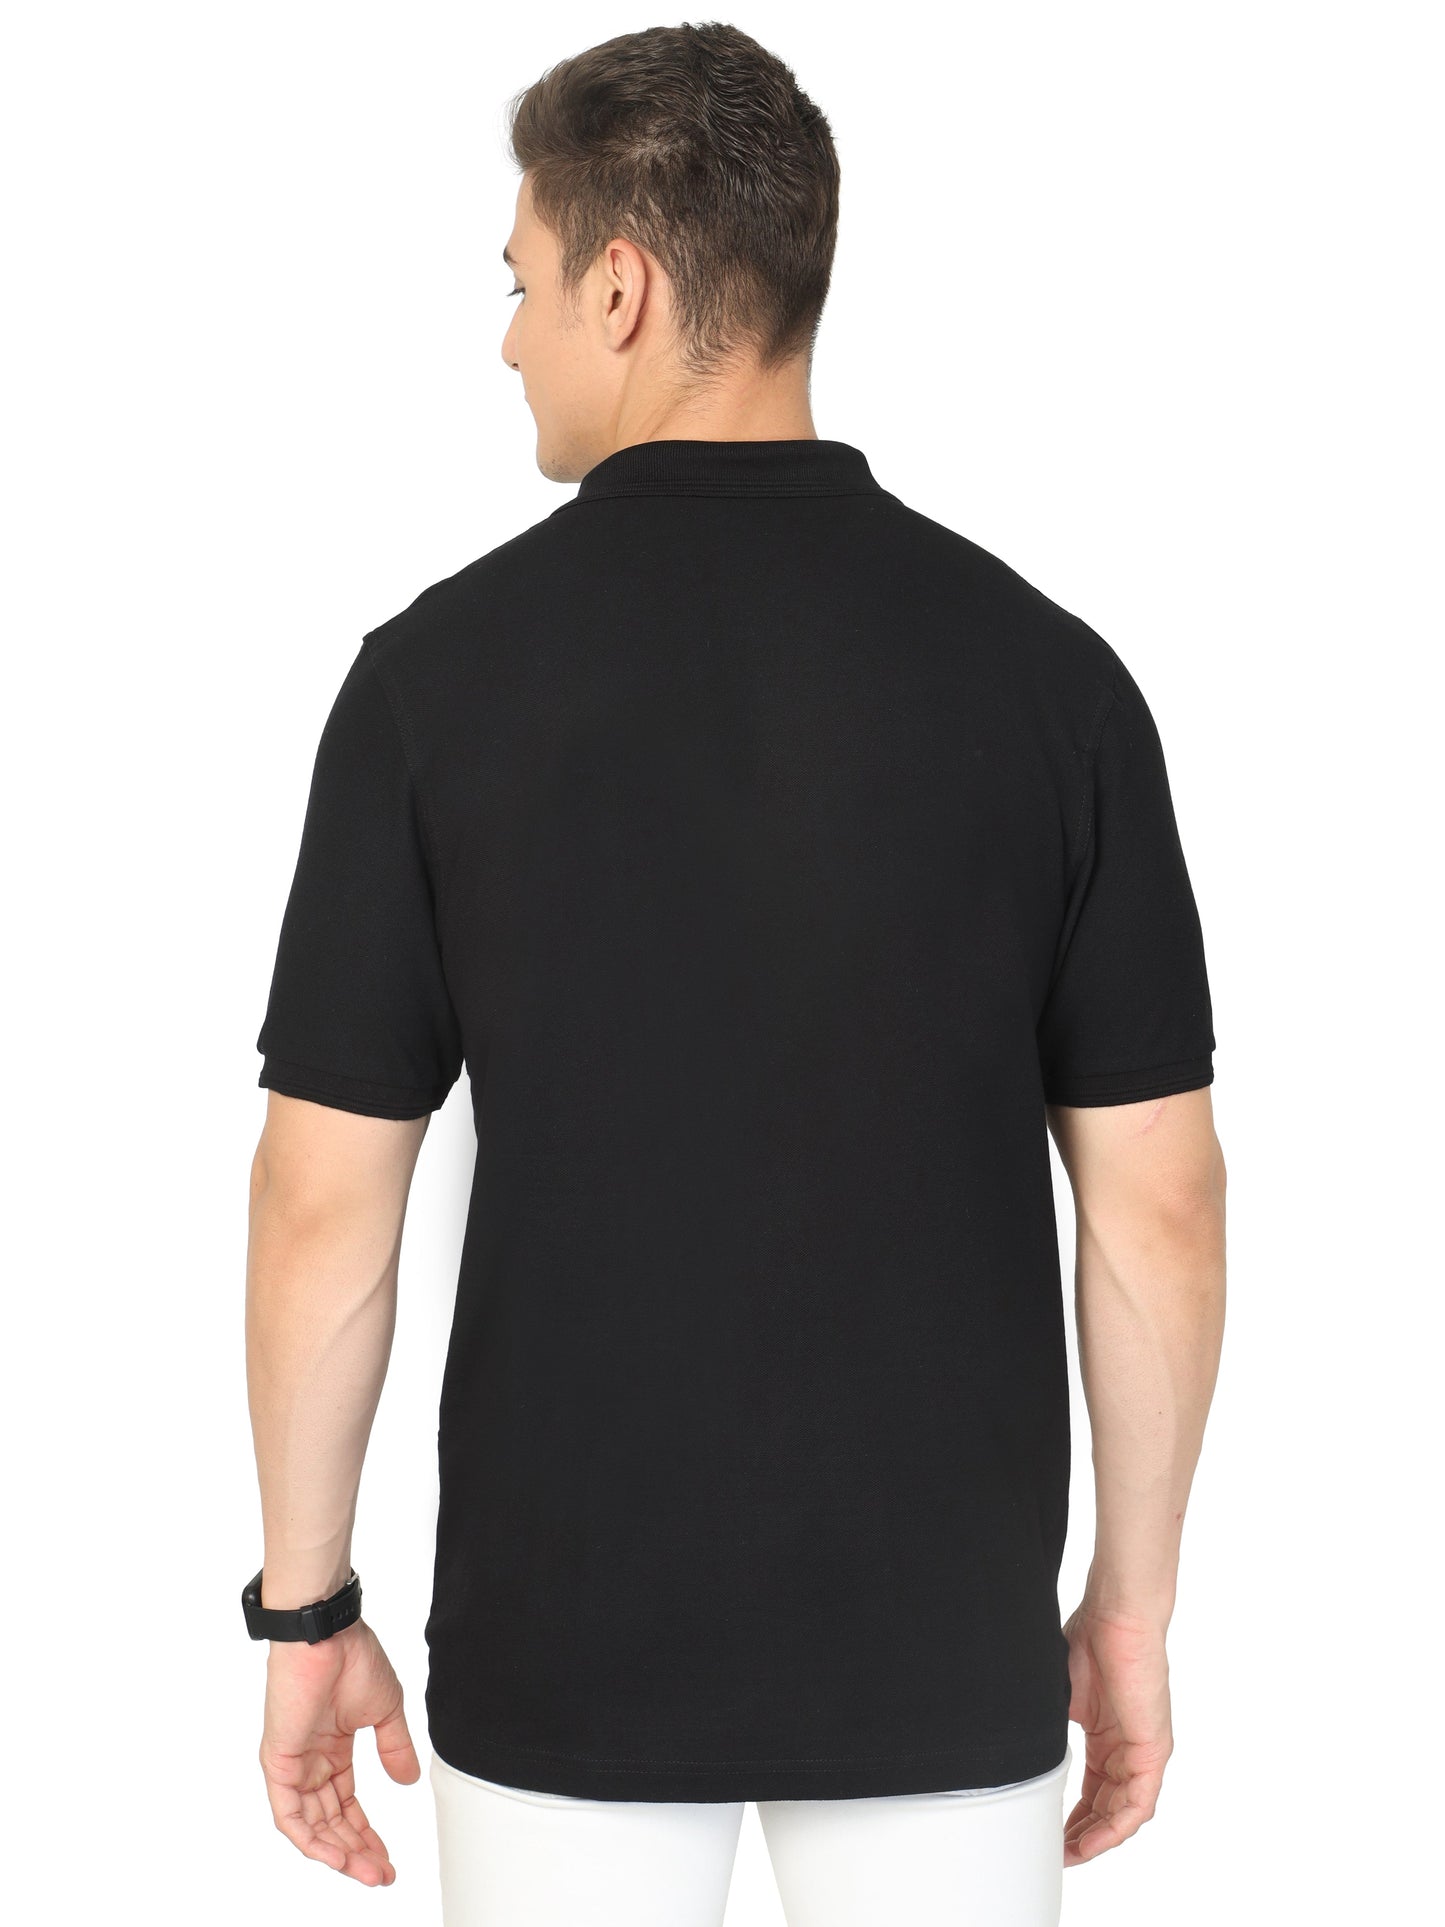 INDIAN ARMY | COLLARED T-SHIRT